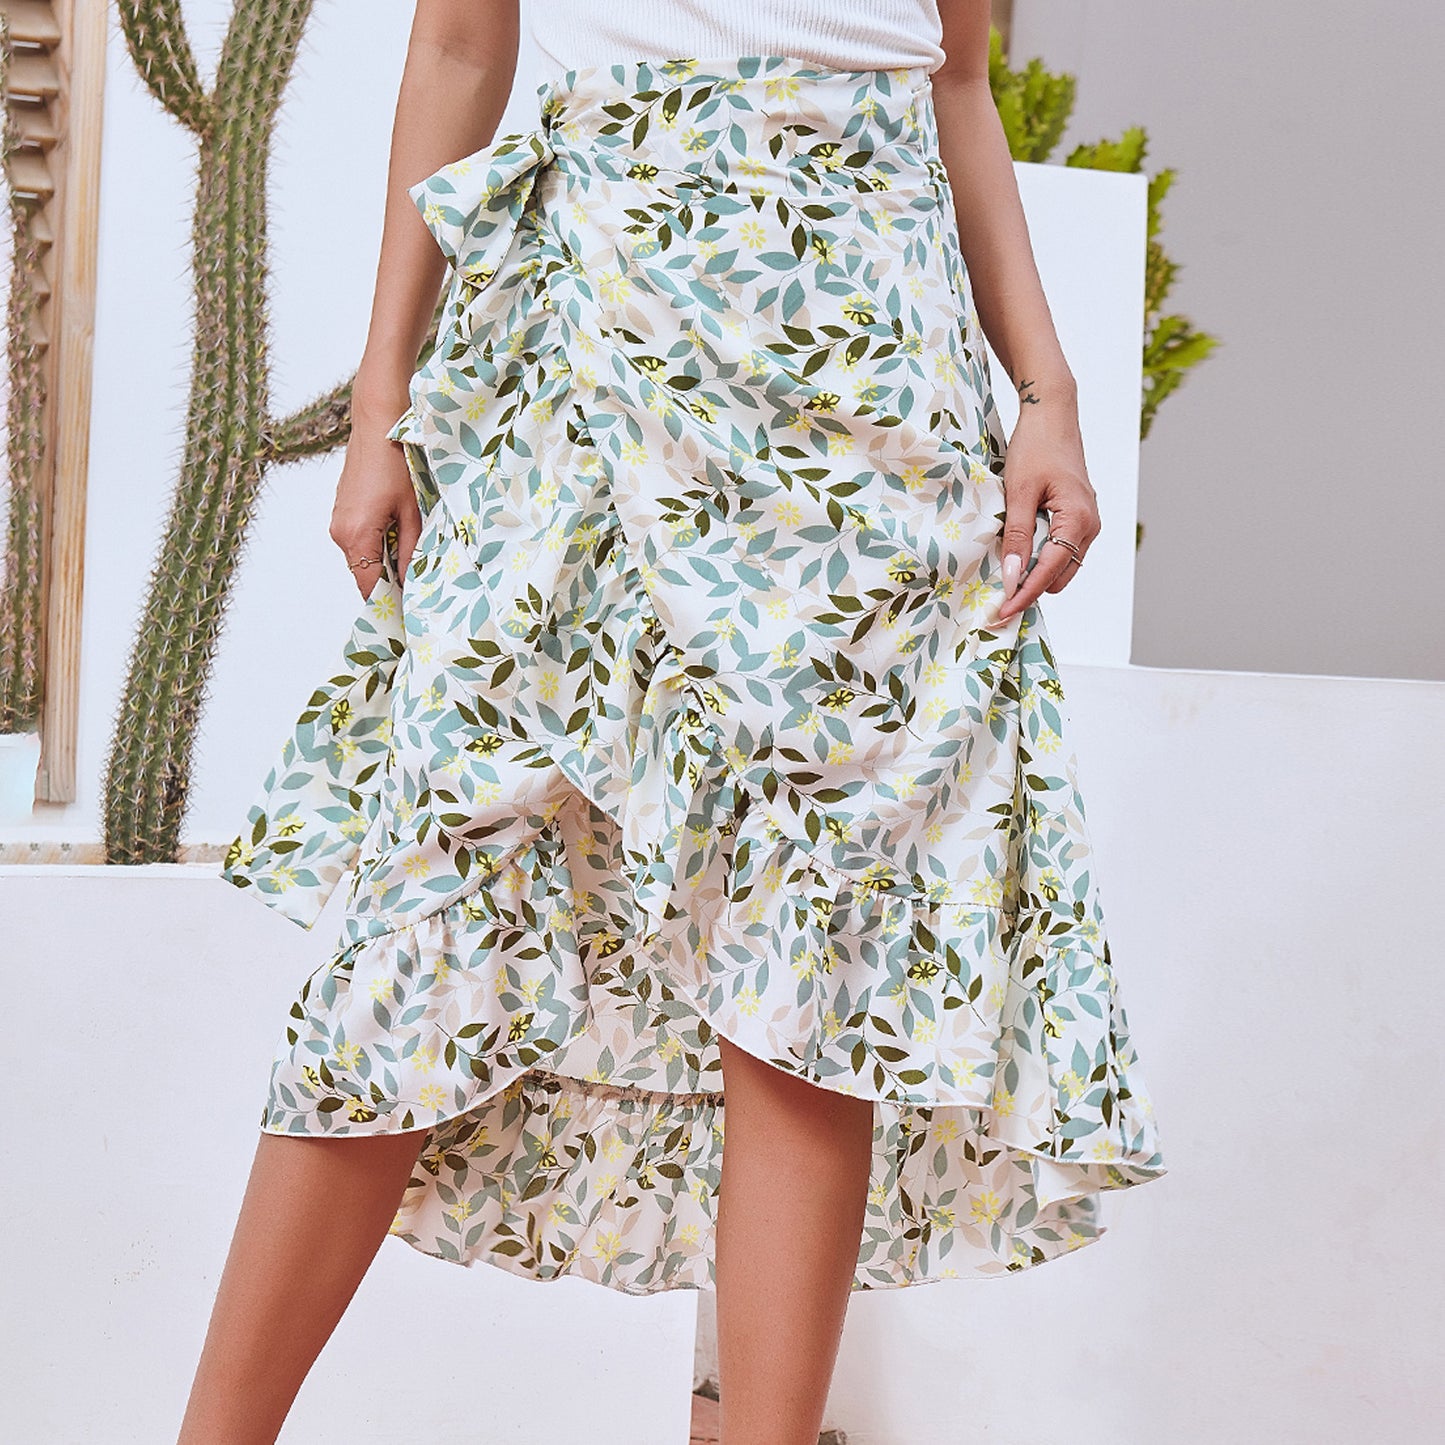 Printed Lace Up Split Expansion Skirt Skirt With Lining